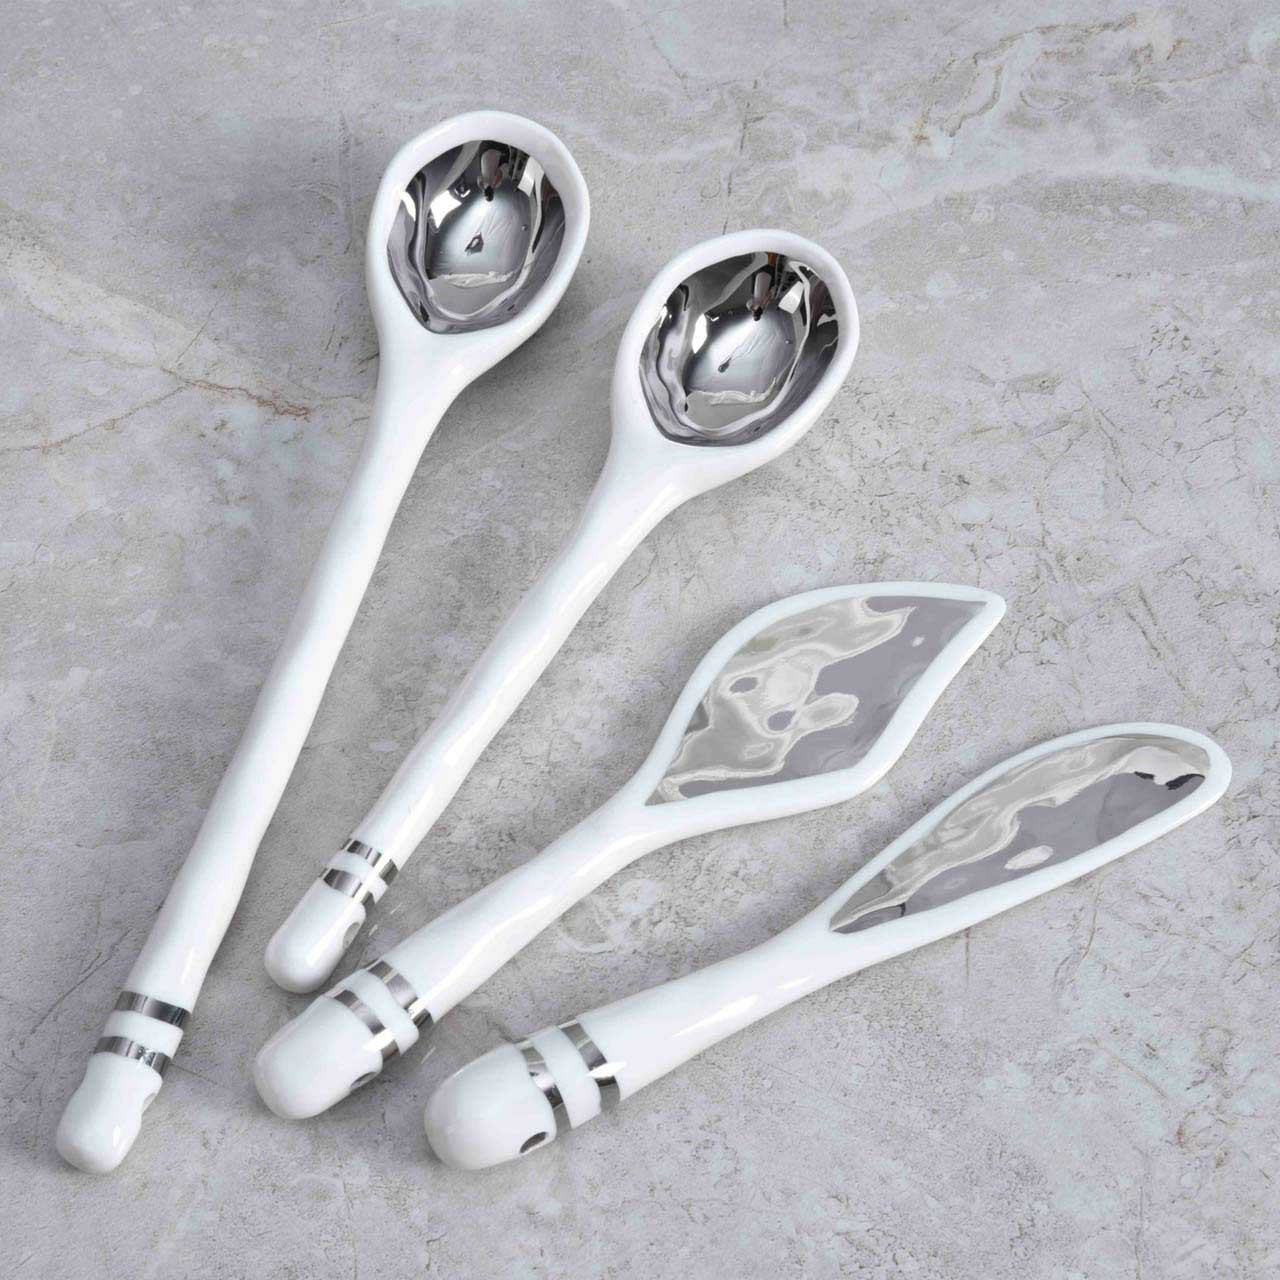 https://cdn11.bigcommerce.com/s-6zwhmb4rdr/images/stencil/1280x1280/products/66136/187231/the-lamp-stand-pampa-bay-porcelain-spoons-and-cheese-knives-cer-2637-w-3__28986.1631549545.jpg?c=1